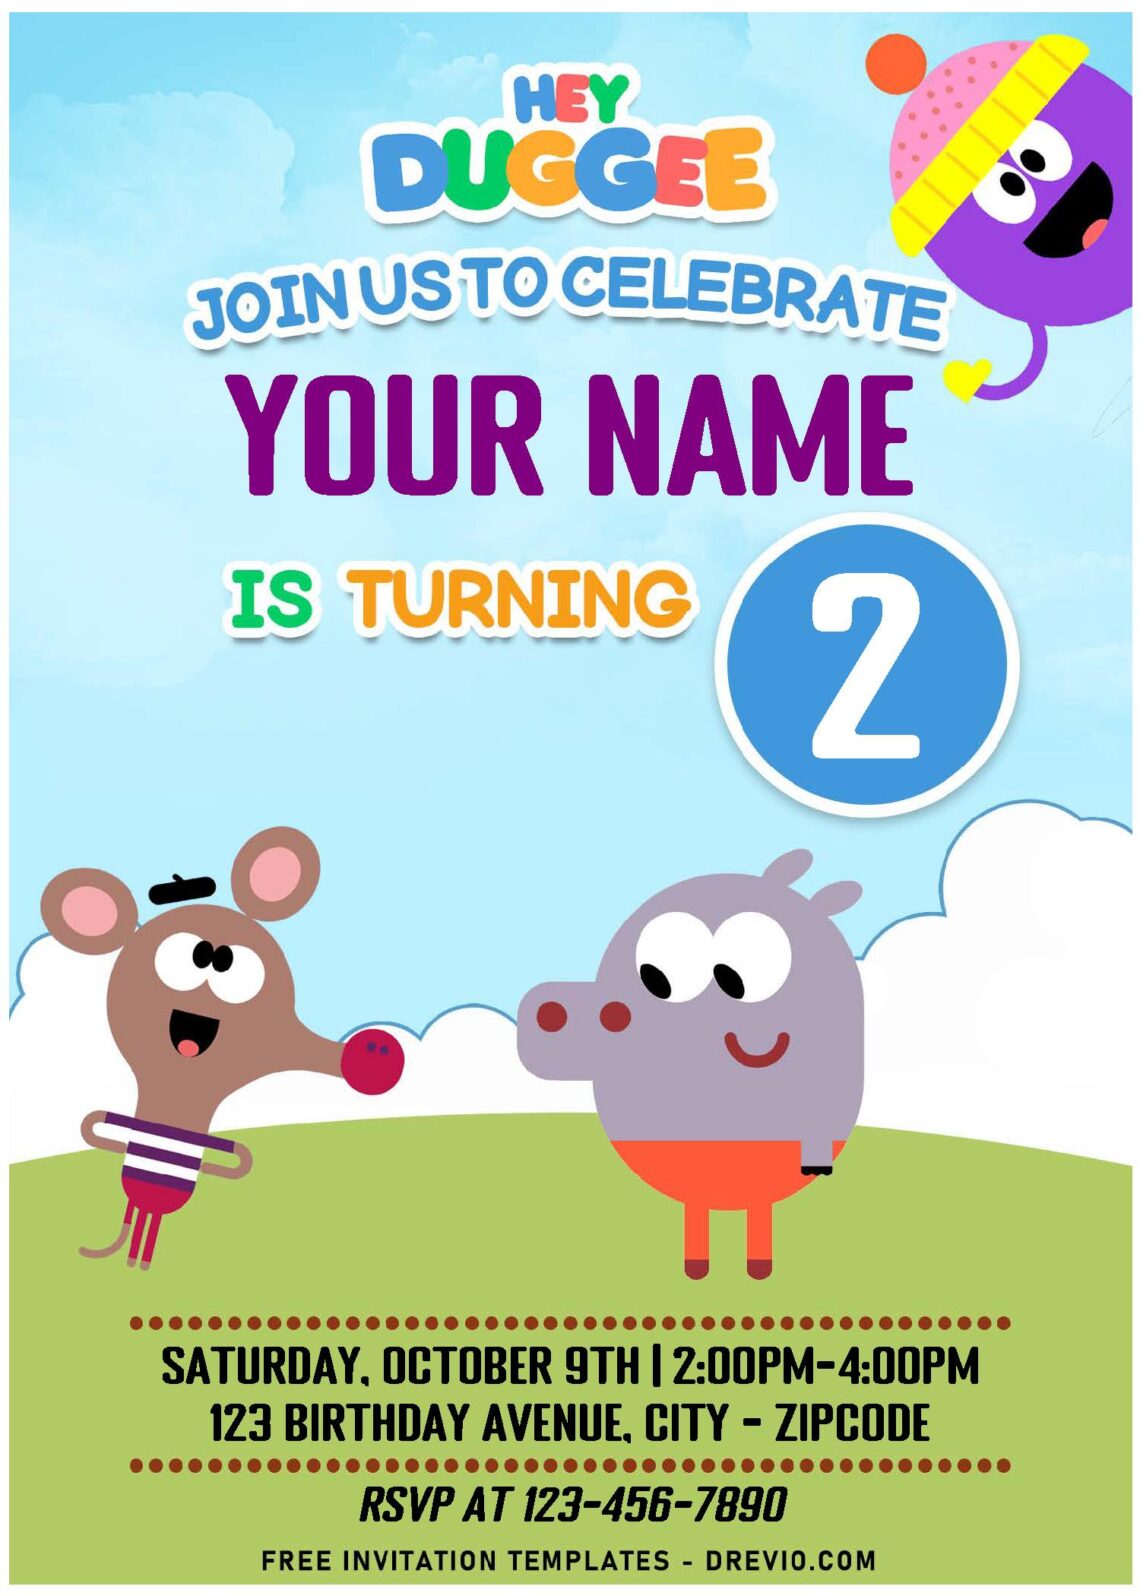 (Free Editable PDF) Whoof Whoof Hey Duggee Birthday Invitation Templates with colorful text